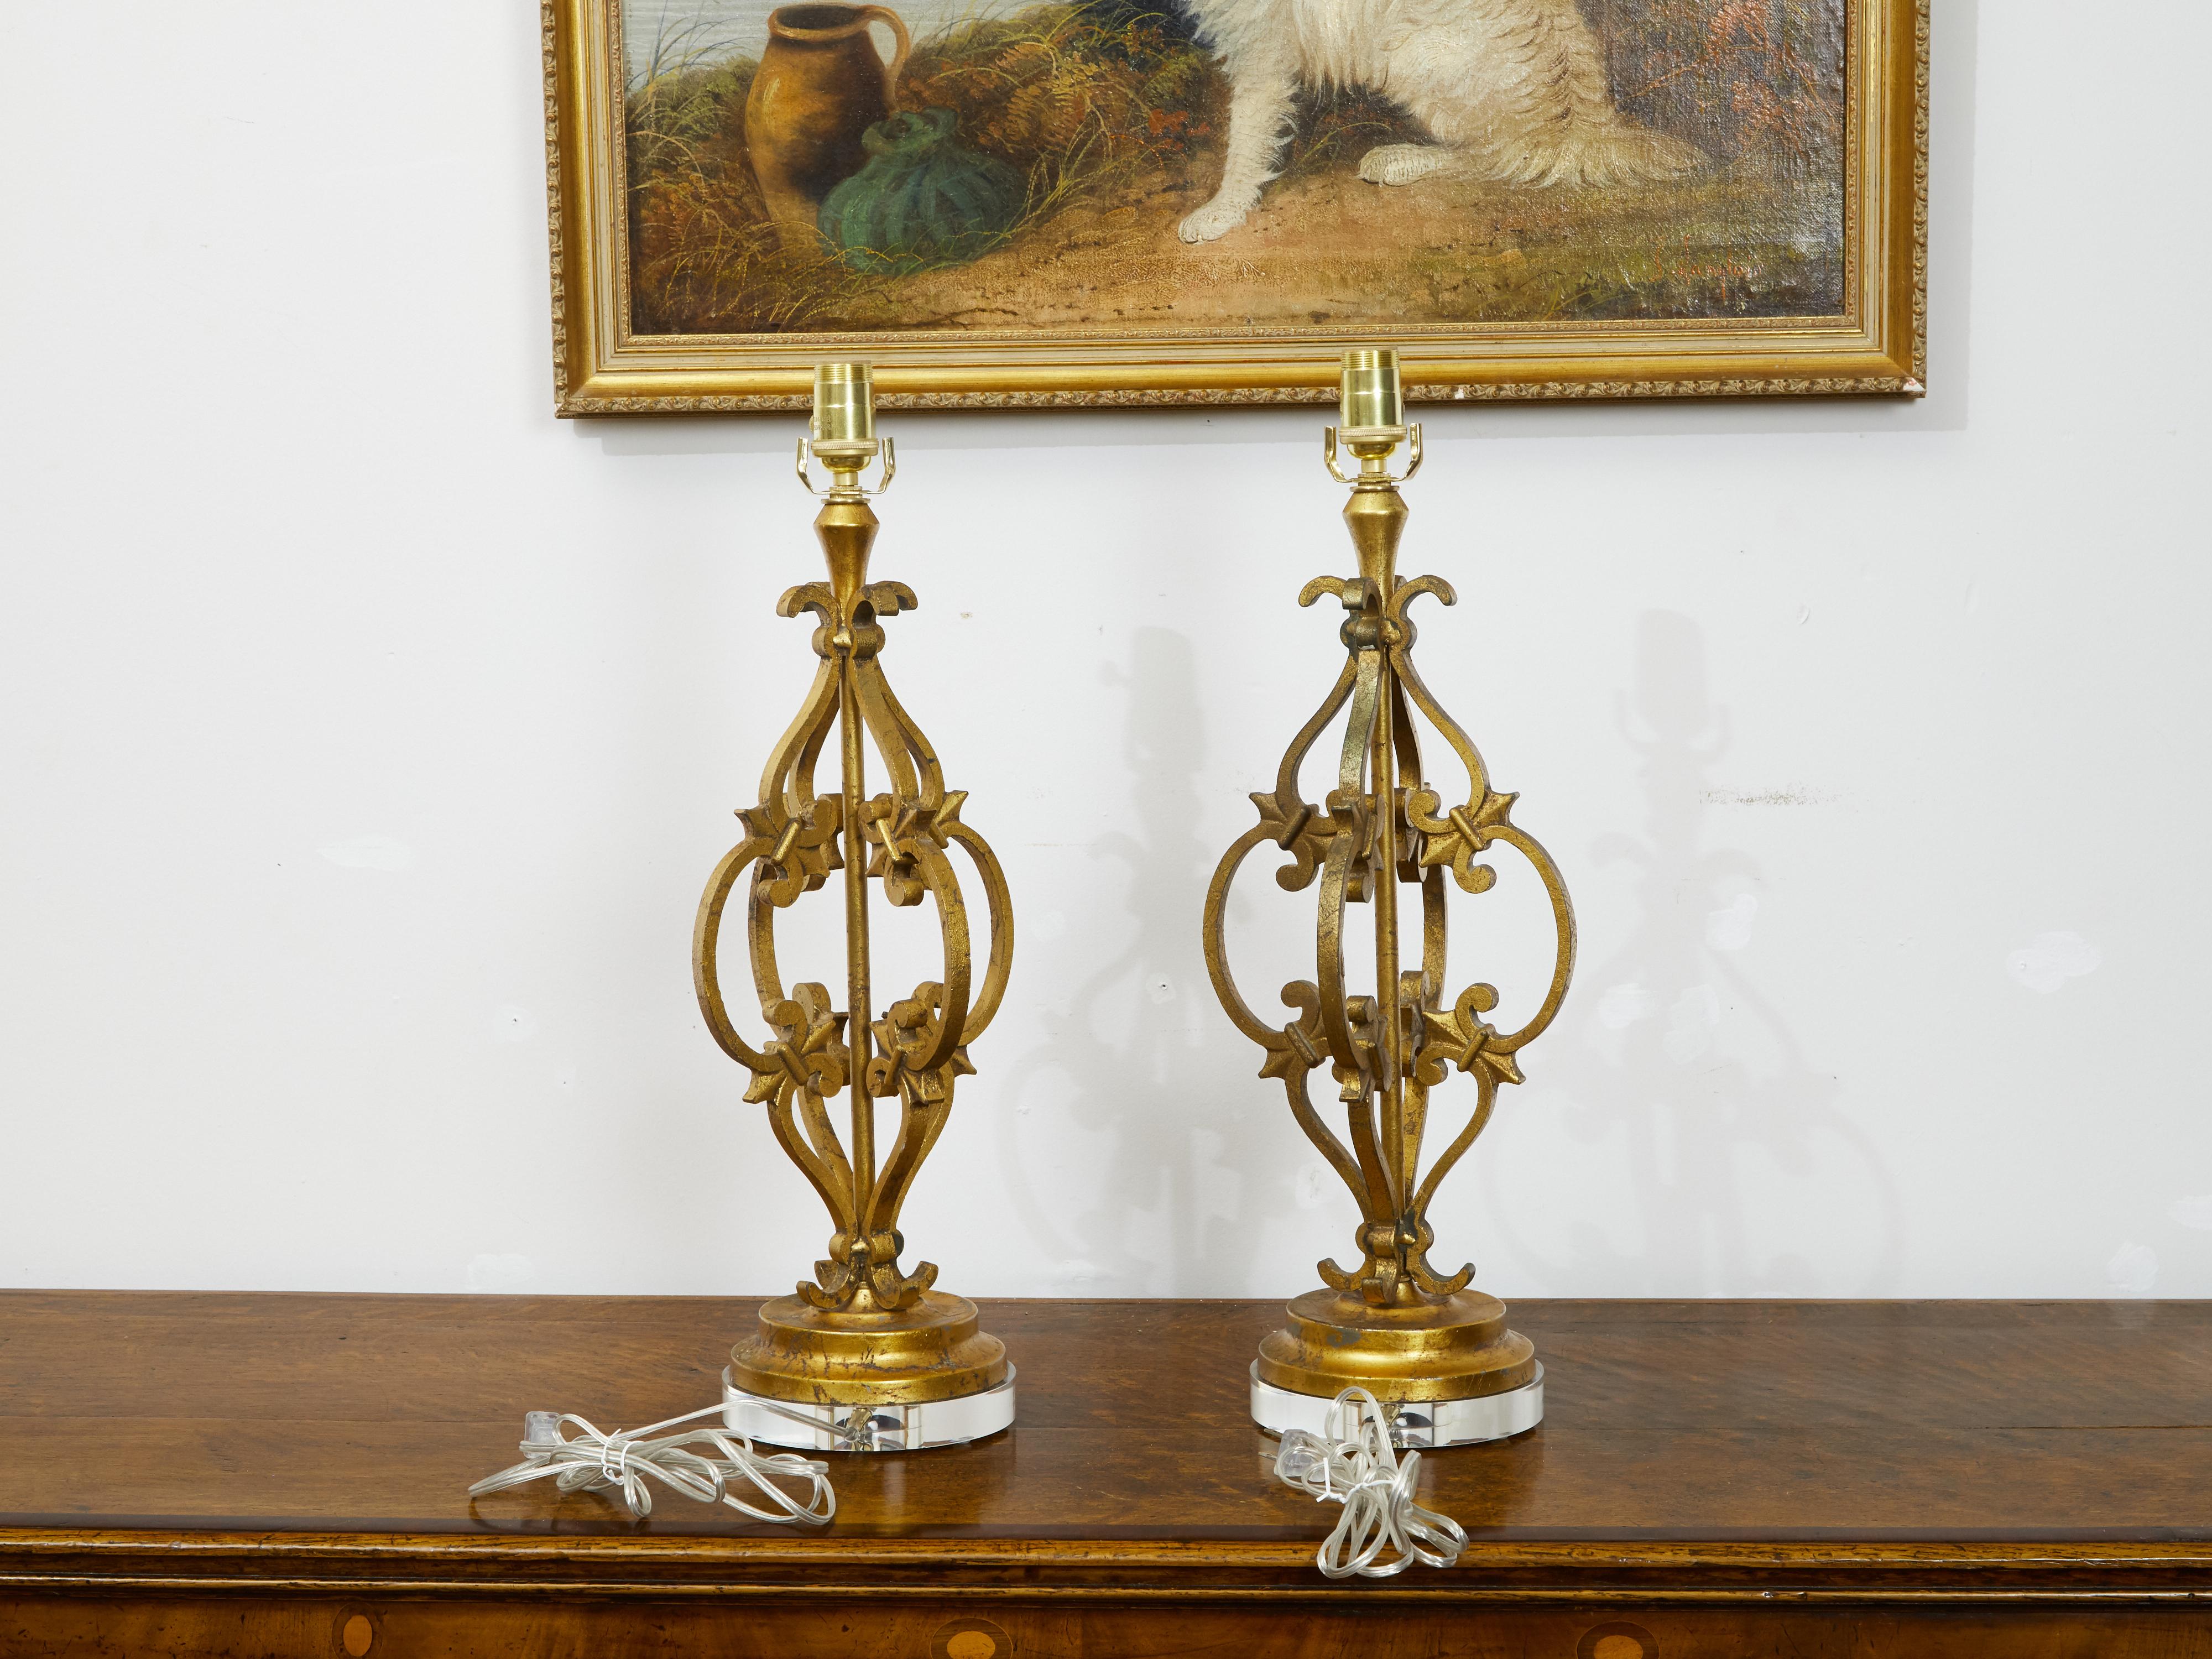 Pair of French Midcentury Gilt Metal Table Lamps with Scrolls and Fleur de Lys In Good Condition For Sale In Atlanta, GA